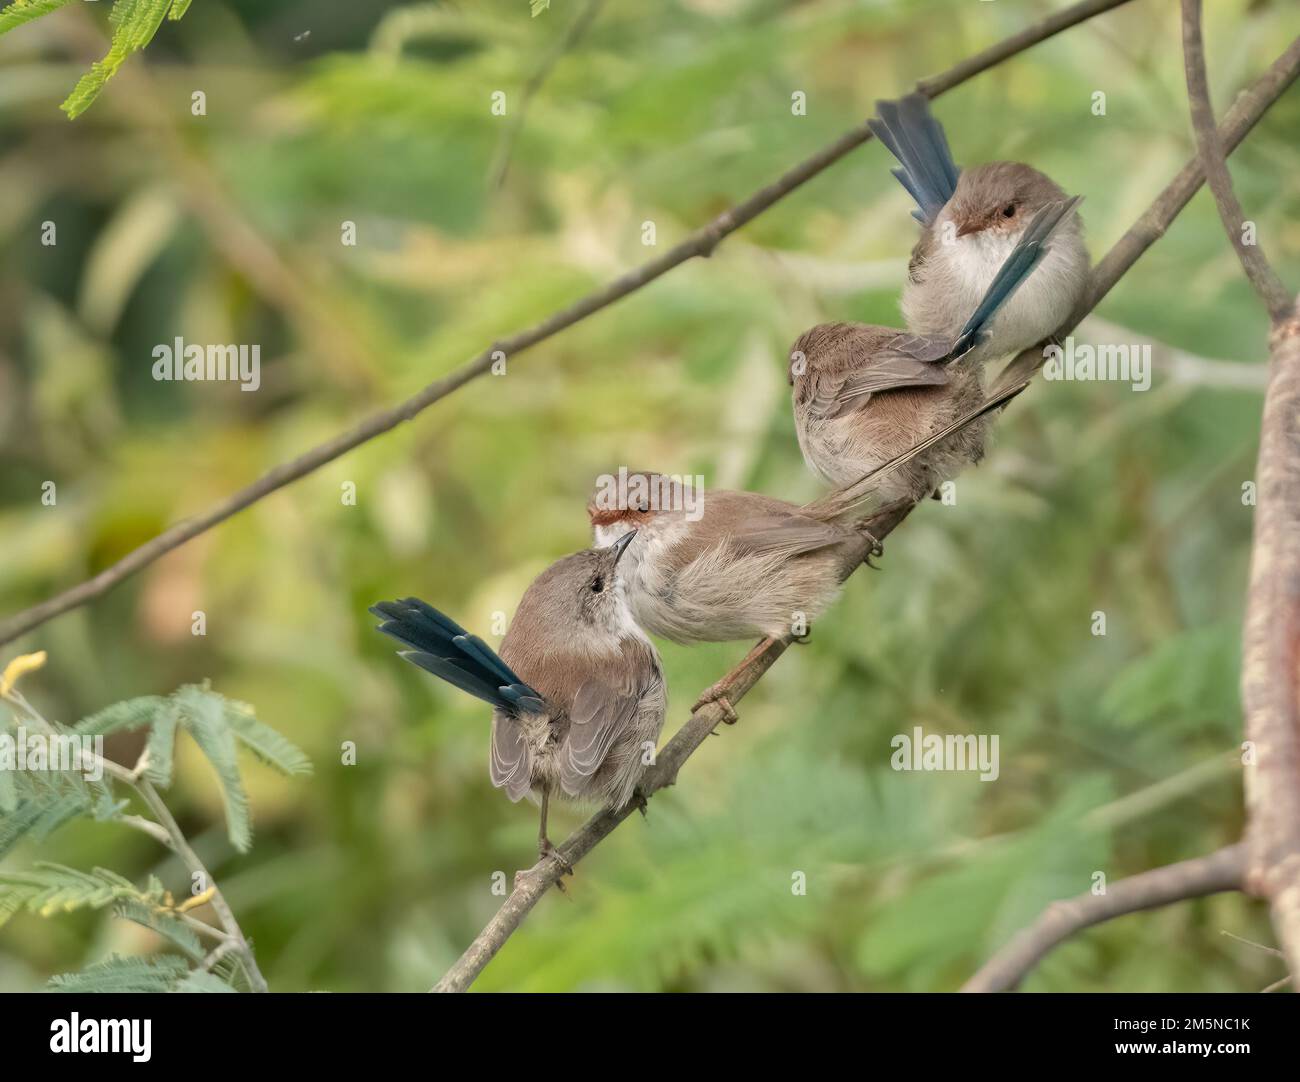 A group of superb fairy wrens perching on a small branch in the woodlands. can be found in open eucalypt woodland forests of south-eastern Australia. Stock Photo